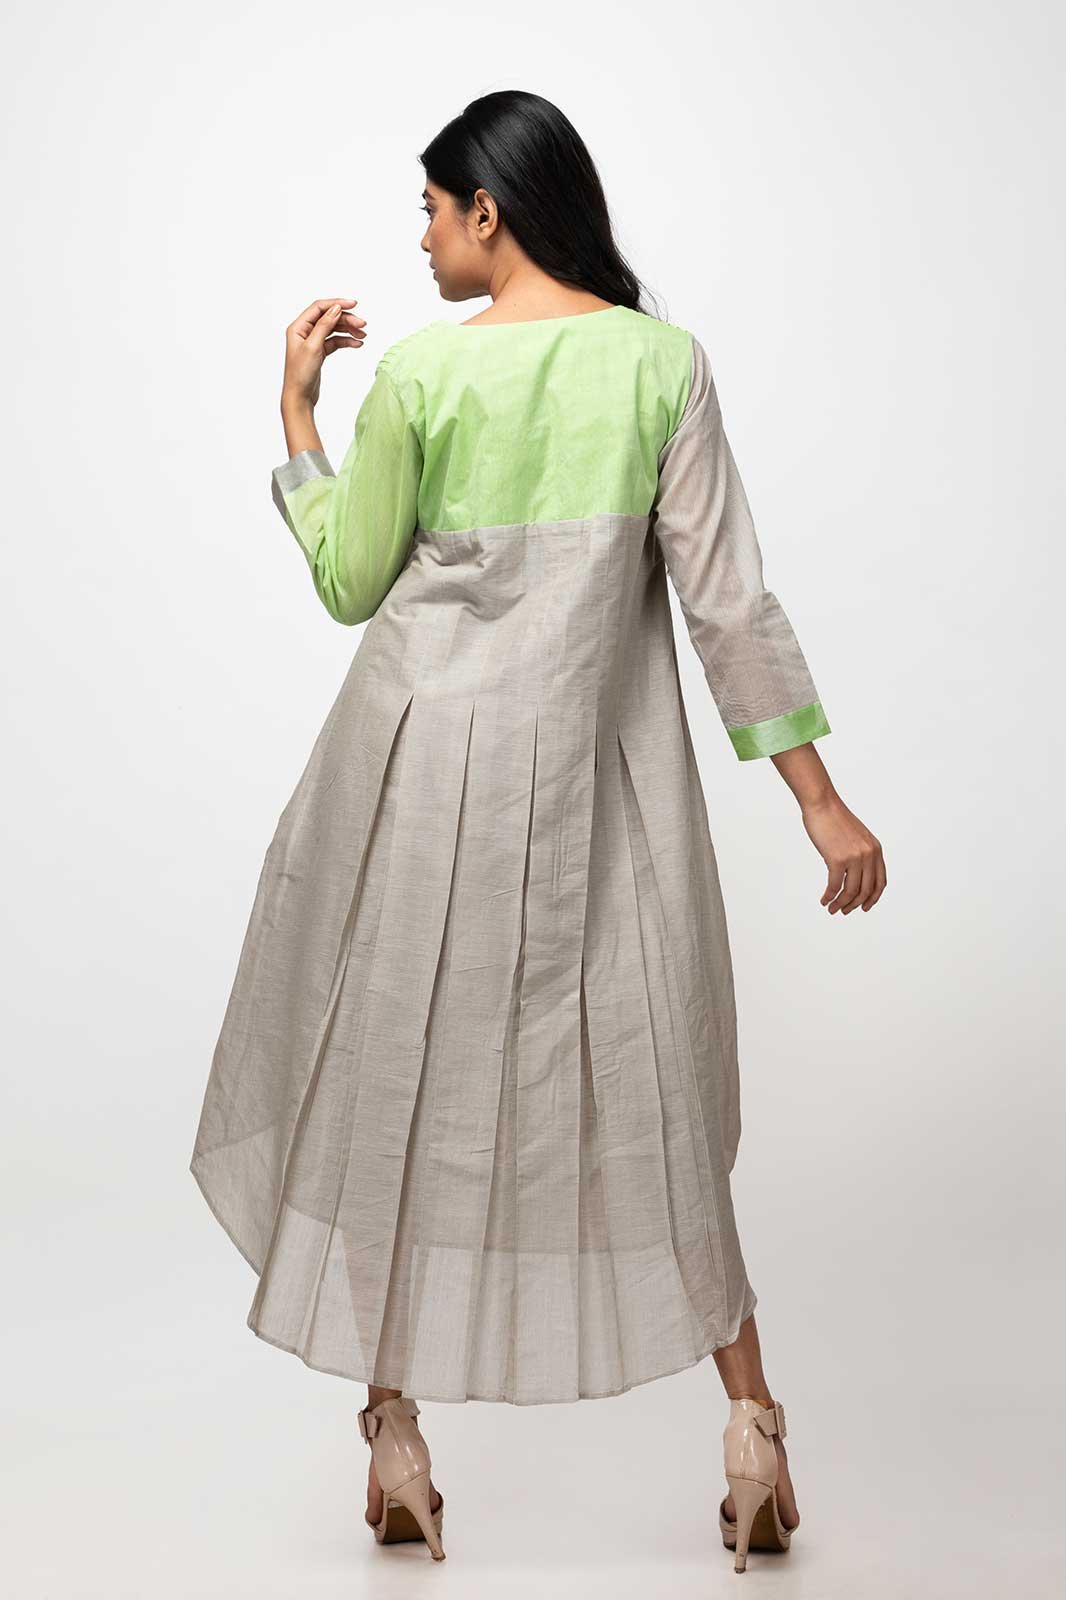 Nonie cotton dress green, cotton green dress, green dress for ladies, green dress for ladies, full sleeve midi dress, full sleeve cotton dress, full sleeve short dress, Sepia stories, Handmade products online, 100% Natural fashion accessories online, Best organic online store, Organic products India, Organic brands online, Natural handmade products, Praful Makhwana, Mister and Mister, Indian handmade products, Indian designer brand, Indian accessories, Women Dresses online, shop organic handmade dresses, handmade dresses for women, shop women dresses online, designer dresses, Indian handmade dresses, fashionable dresses, Women dresses, organic dresses, dresses for women, designer women dresses, handmade women dresses, organic handmade clothing, handmade organic clothing, natural fabrics, handcrafted clothing in India, organic fabrics, eco-friendly clothing brands, organic clothing range, sustainable clothing